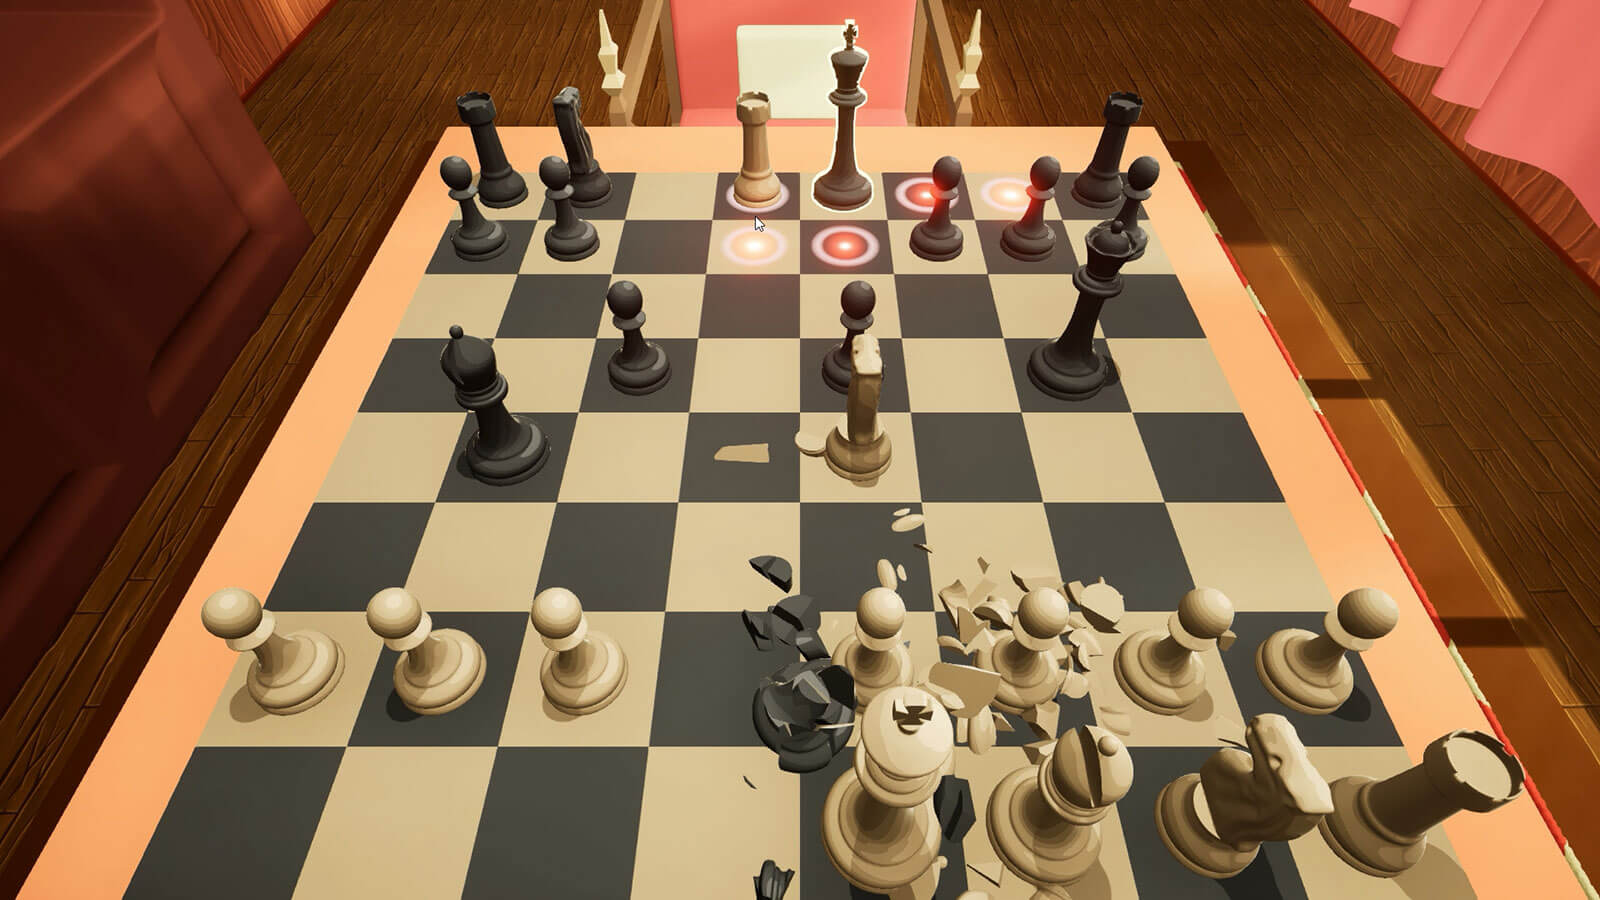 The bad way to play chess: 3D physics fun using Castle Game Engine (Part 1)